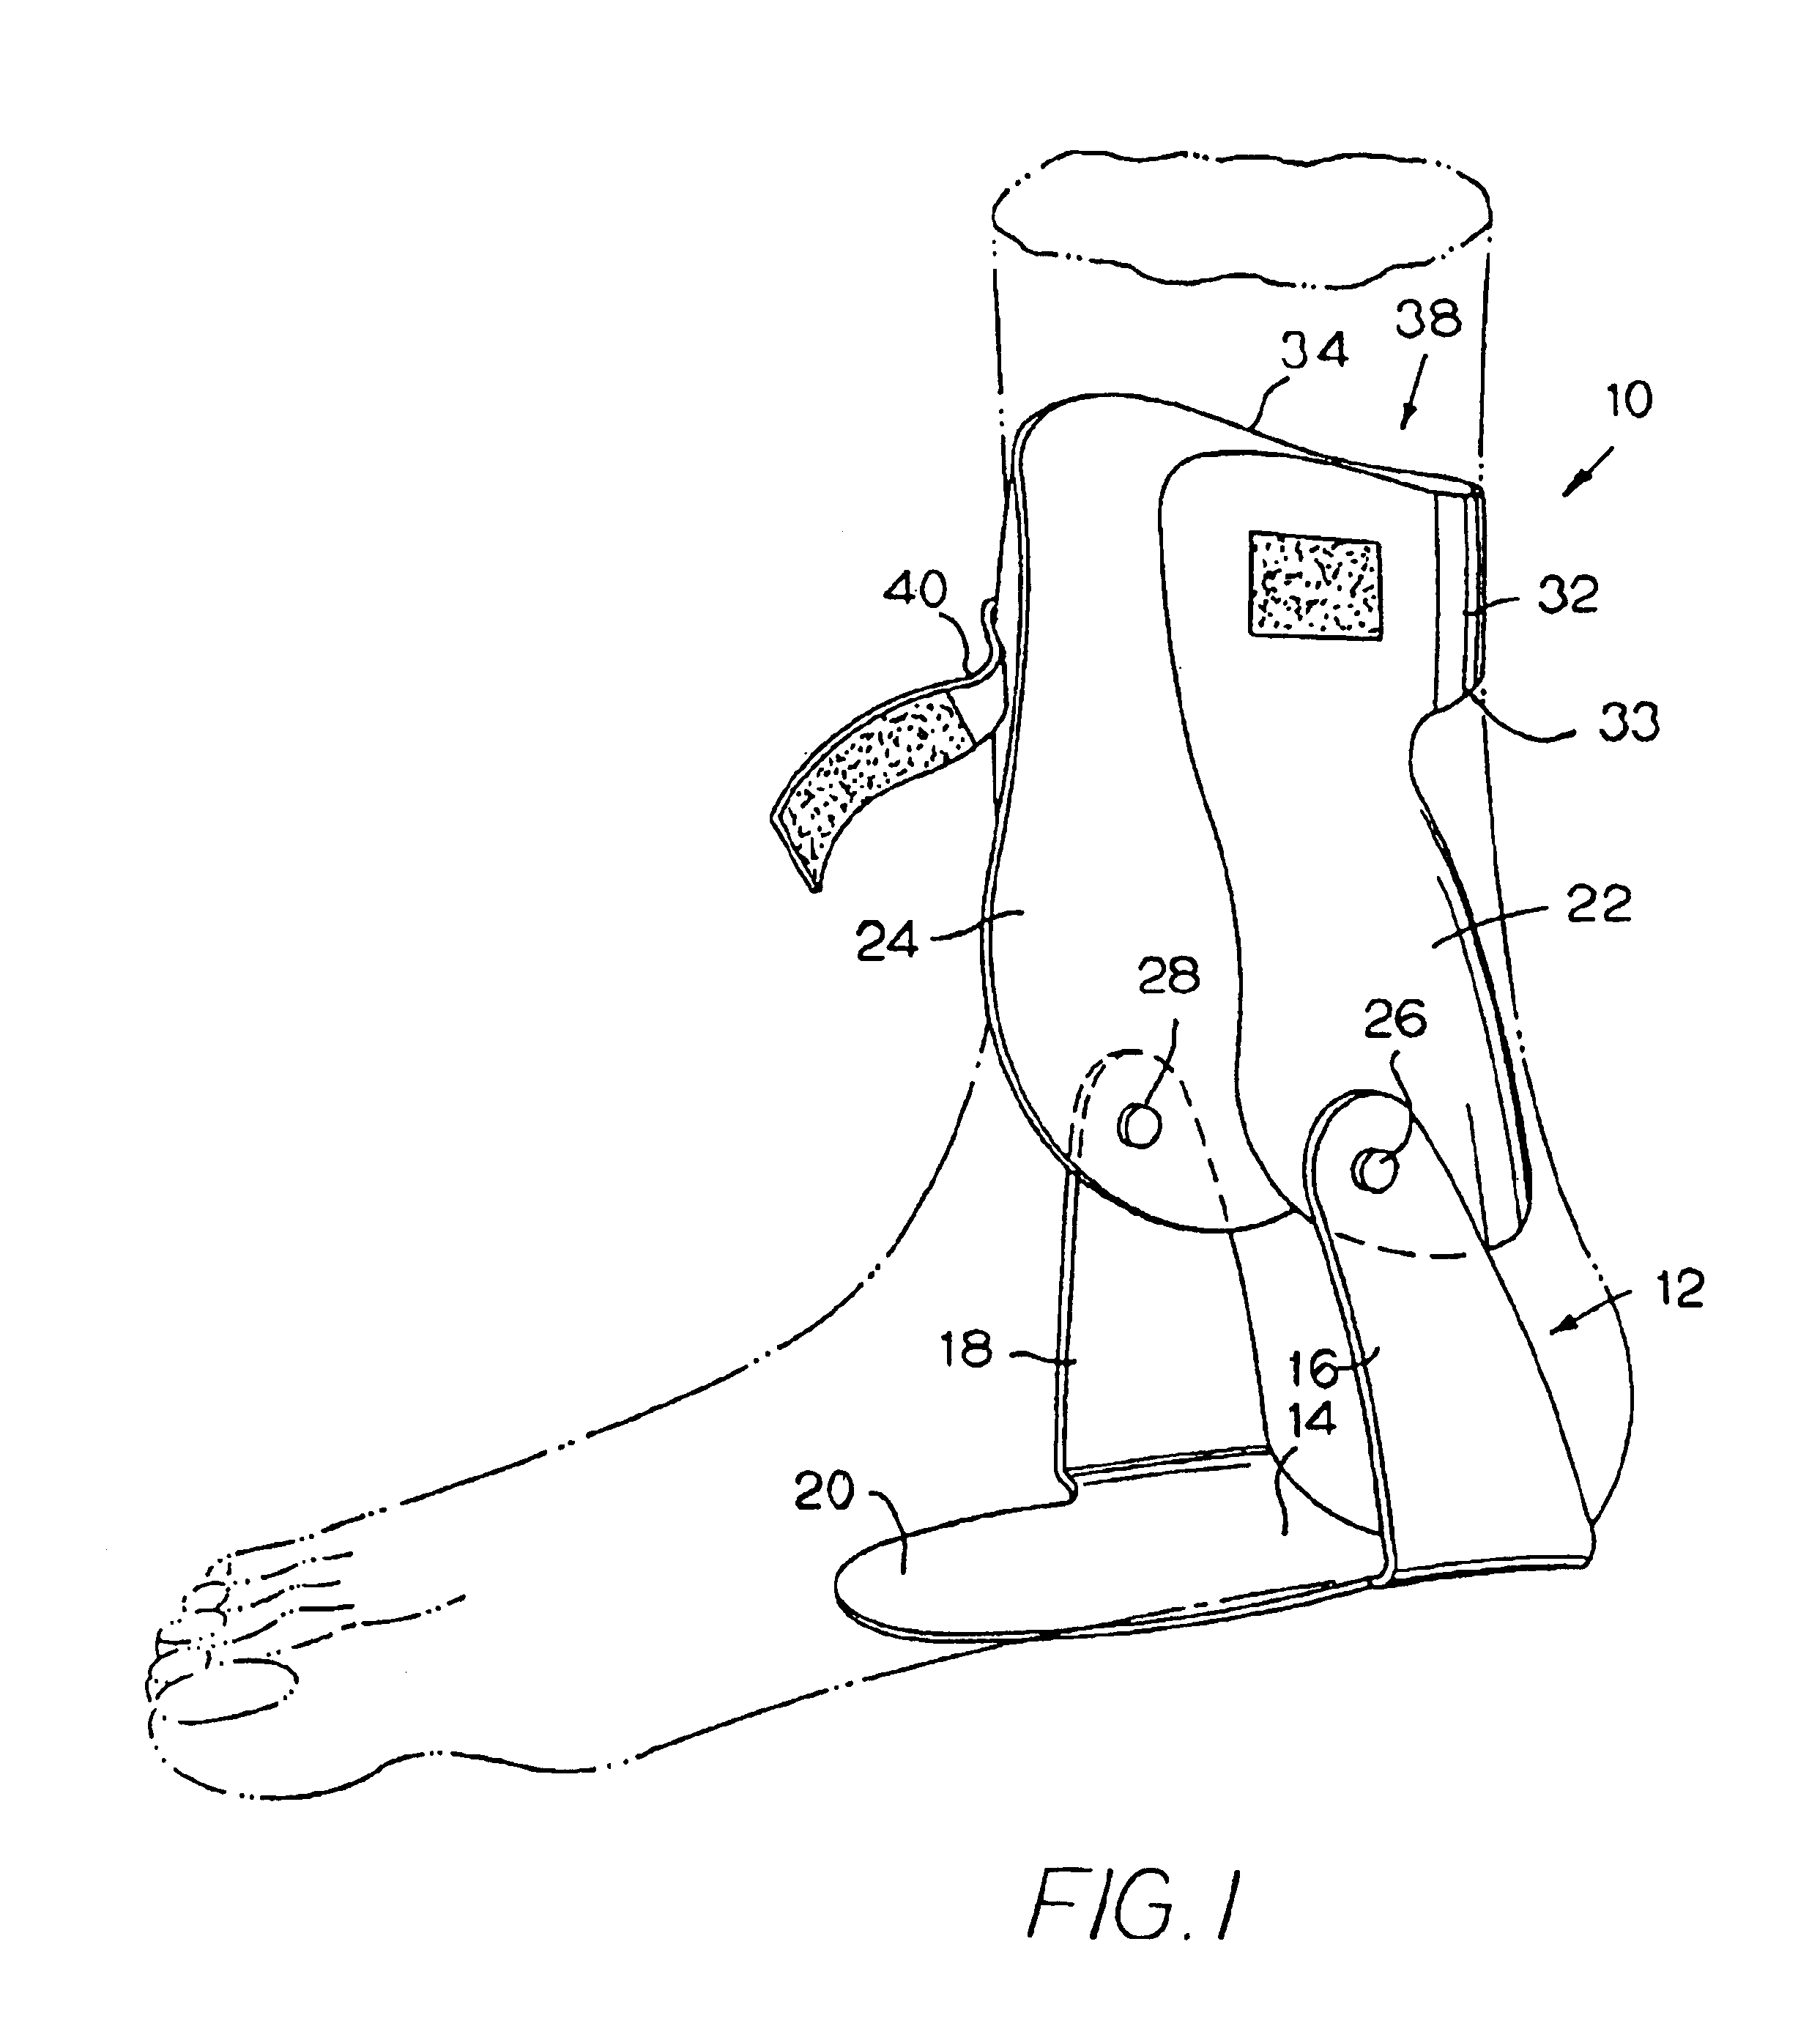 Ankle brace with cuff and strap